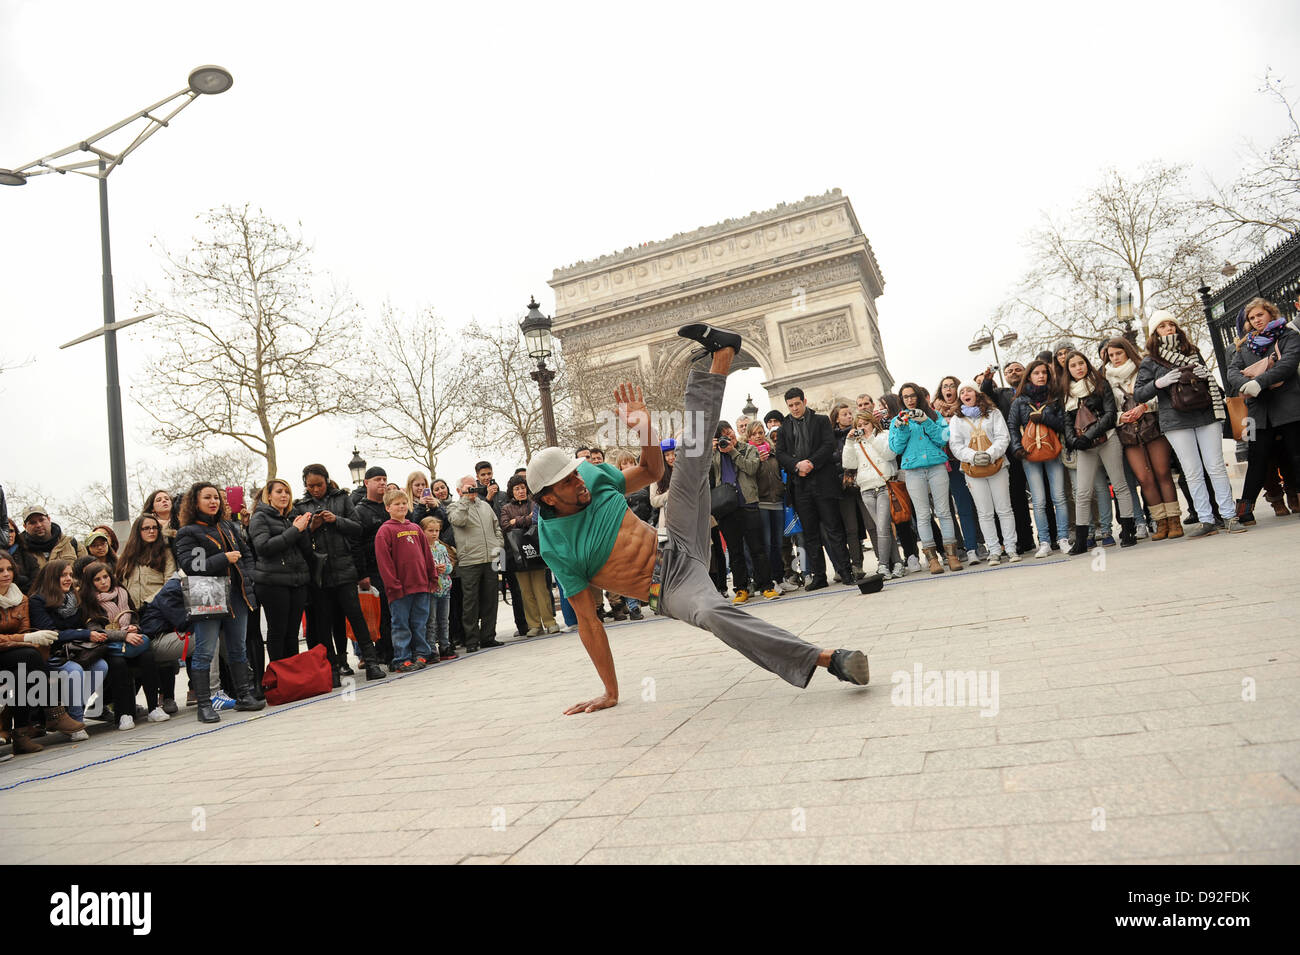 Break dancer entertaining crowd on the street Paris France. Picture by Sam Bagnall Stock Photo